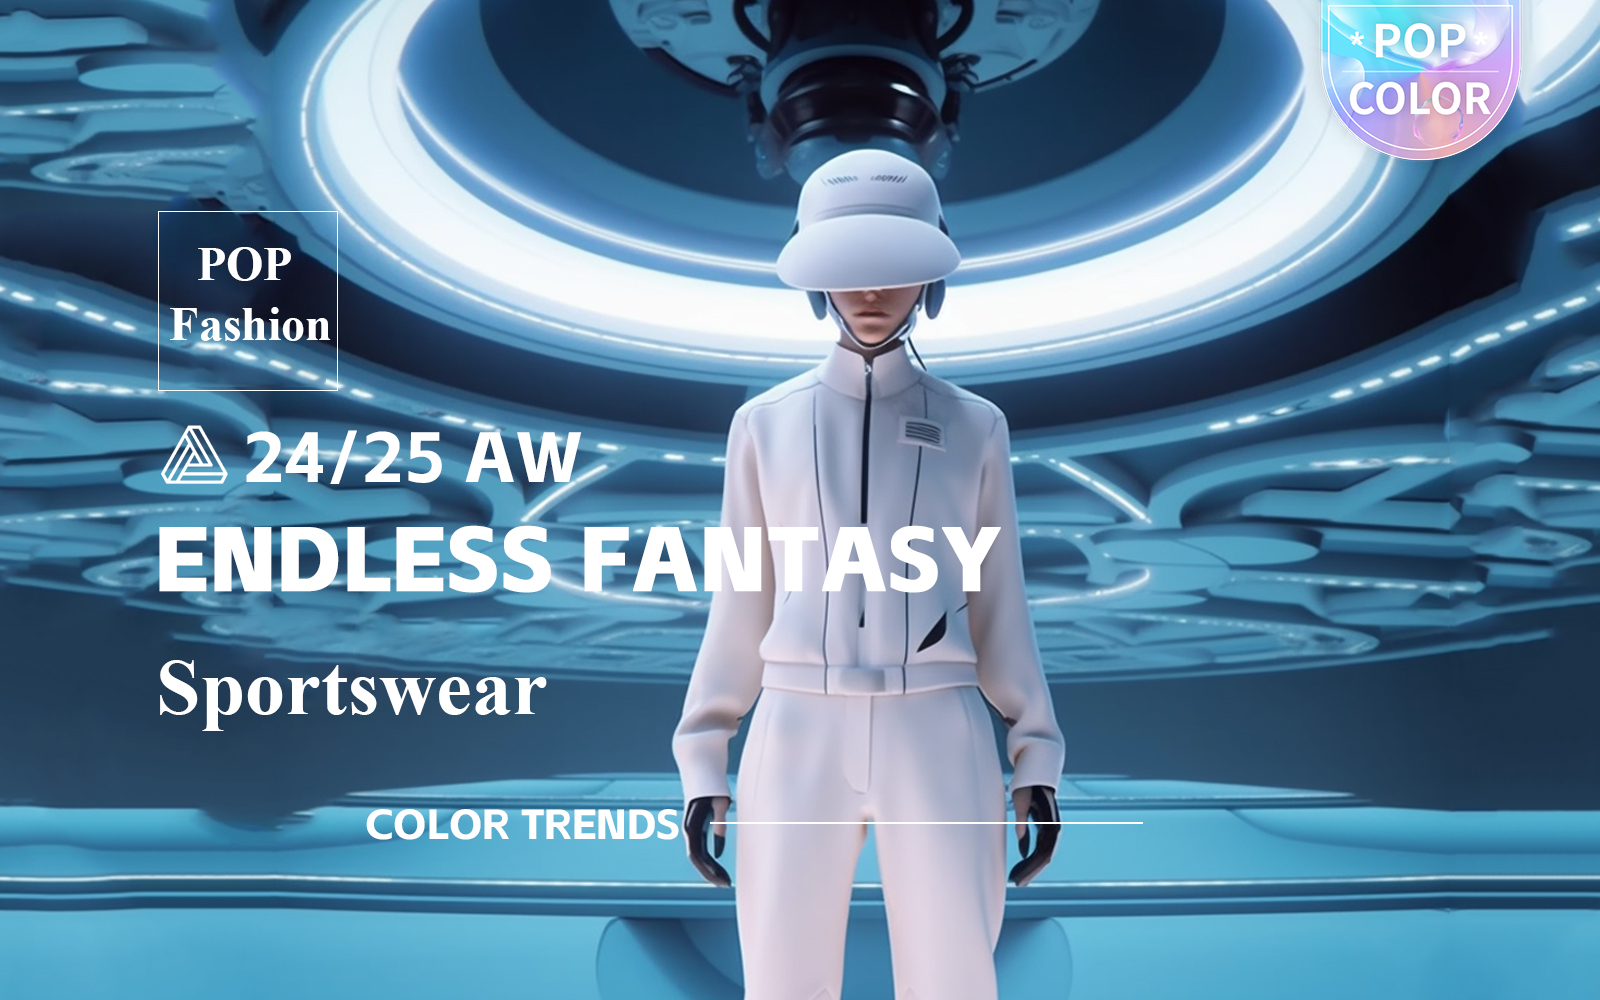 Endless Fantasy -- A/W 24/25 Color Trend of Sportswear